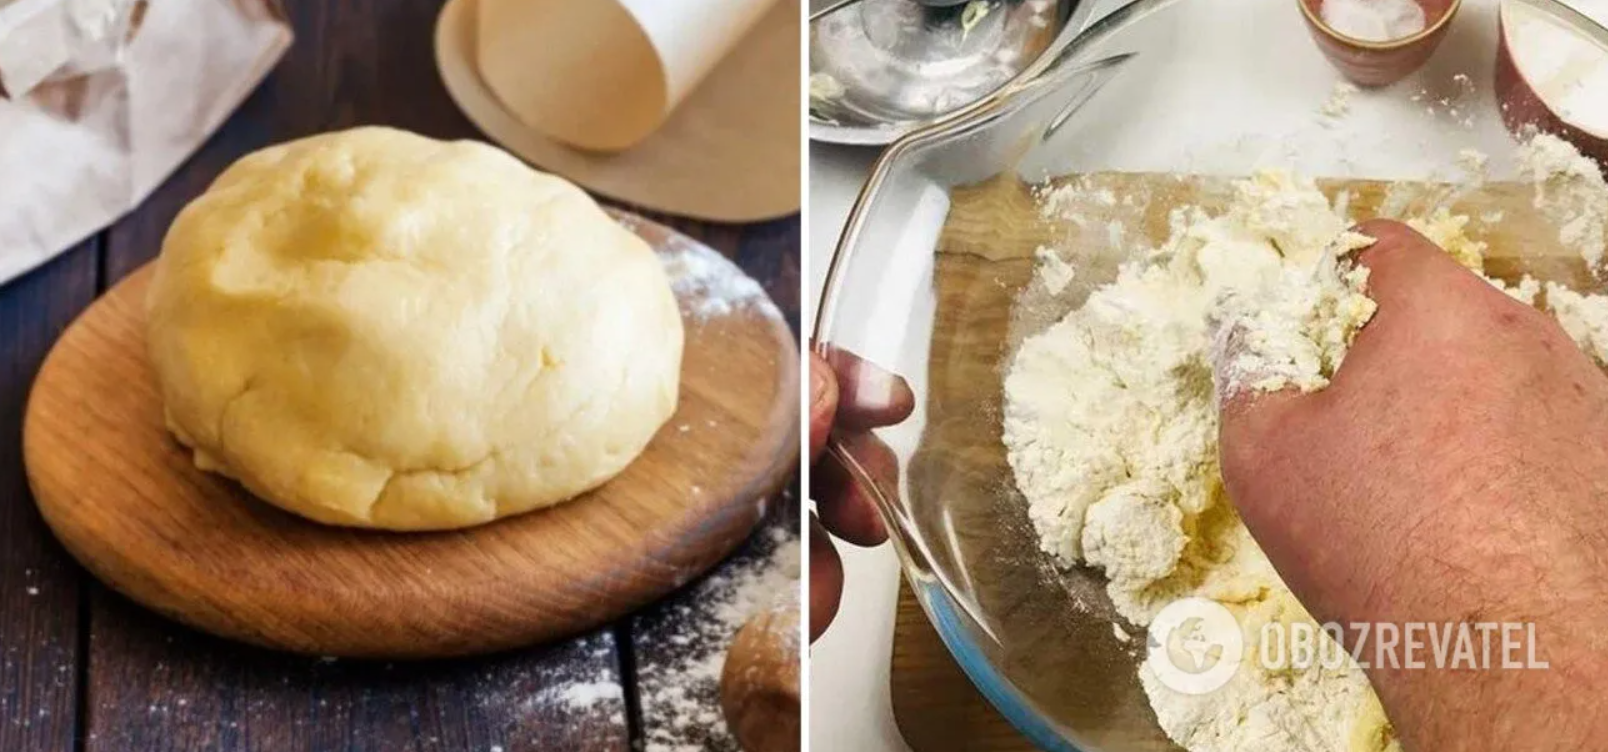 Shortbread dough without eggs for baking